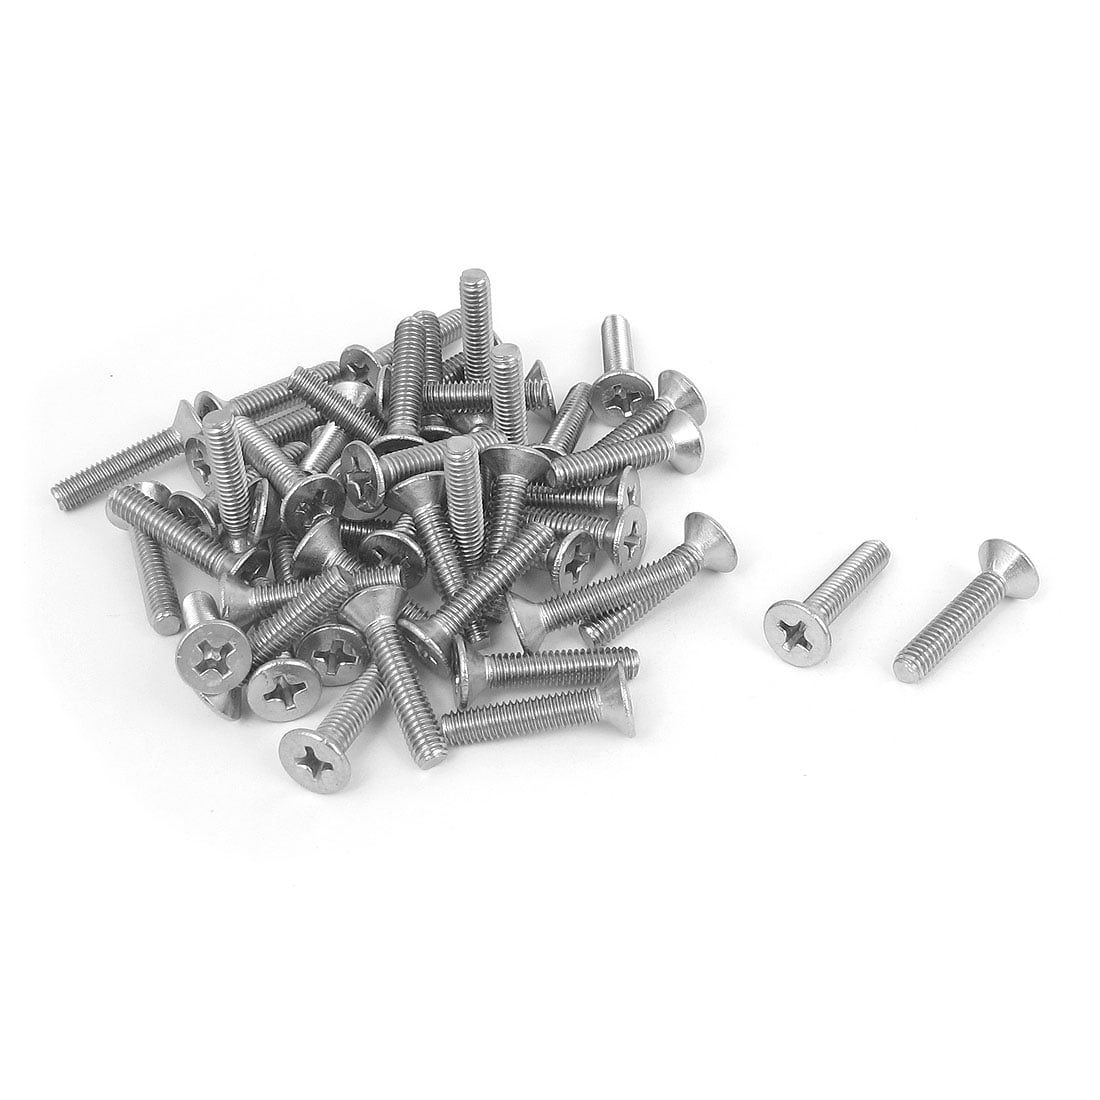 Machine screws with nuts M4 x 20 countersunk slot bolt bolts screw pack of 50 